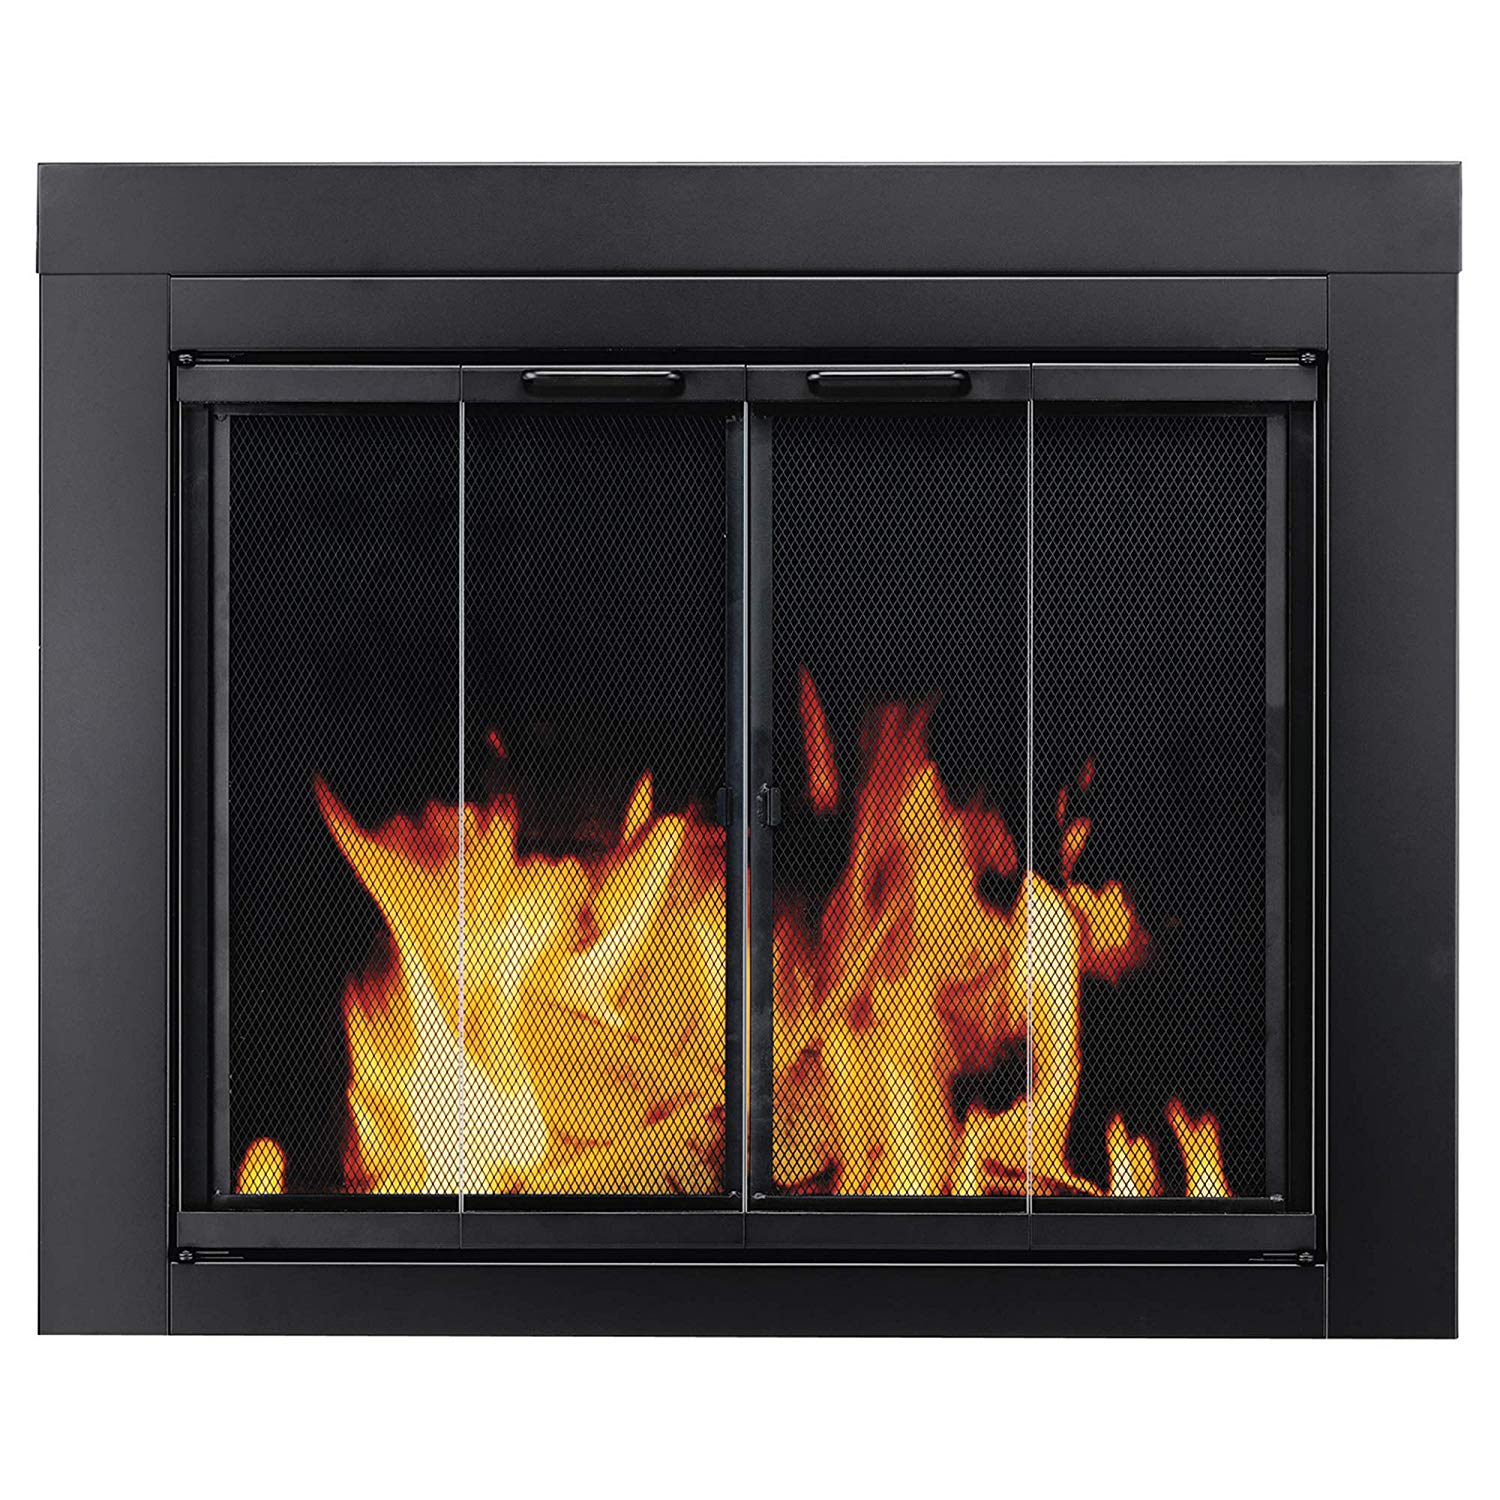 Spark Guard Fireplace Screen Elegant Pleasant Hearth at 1000 ascot Fireplace Glass Door Black Small